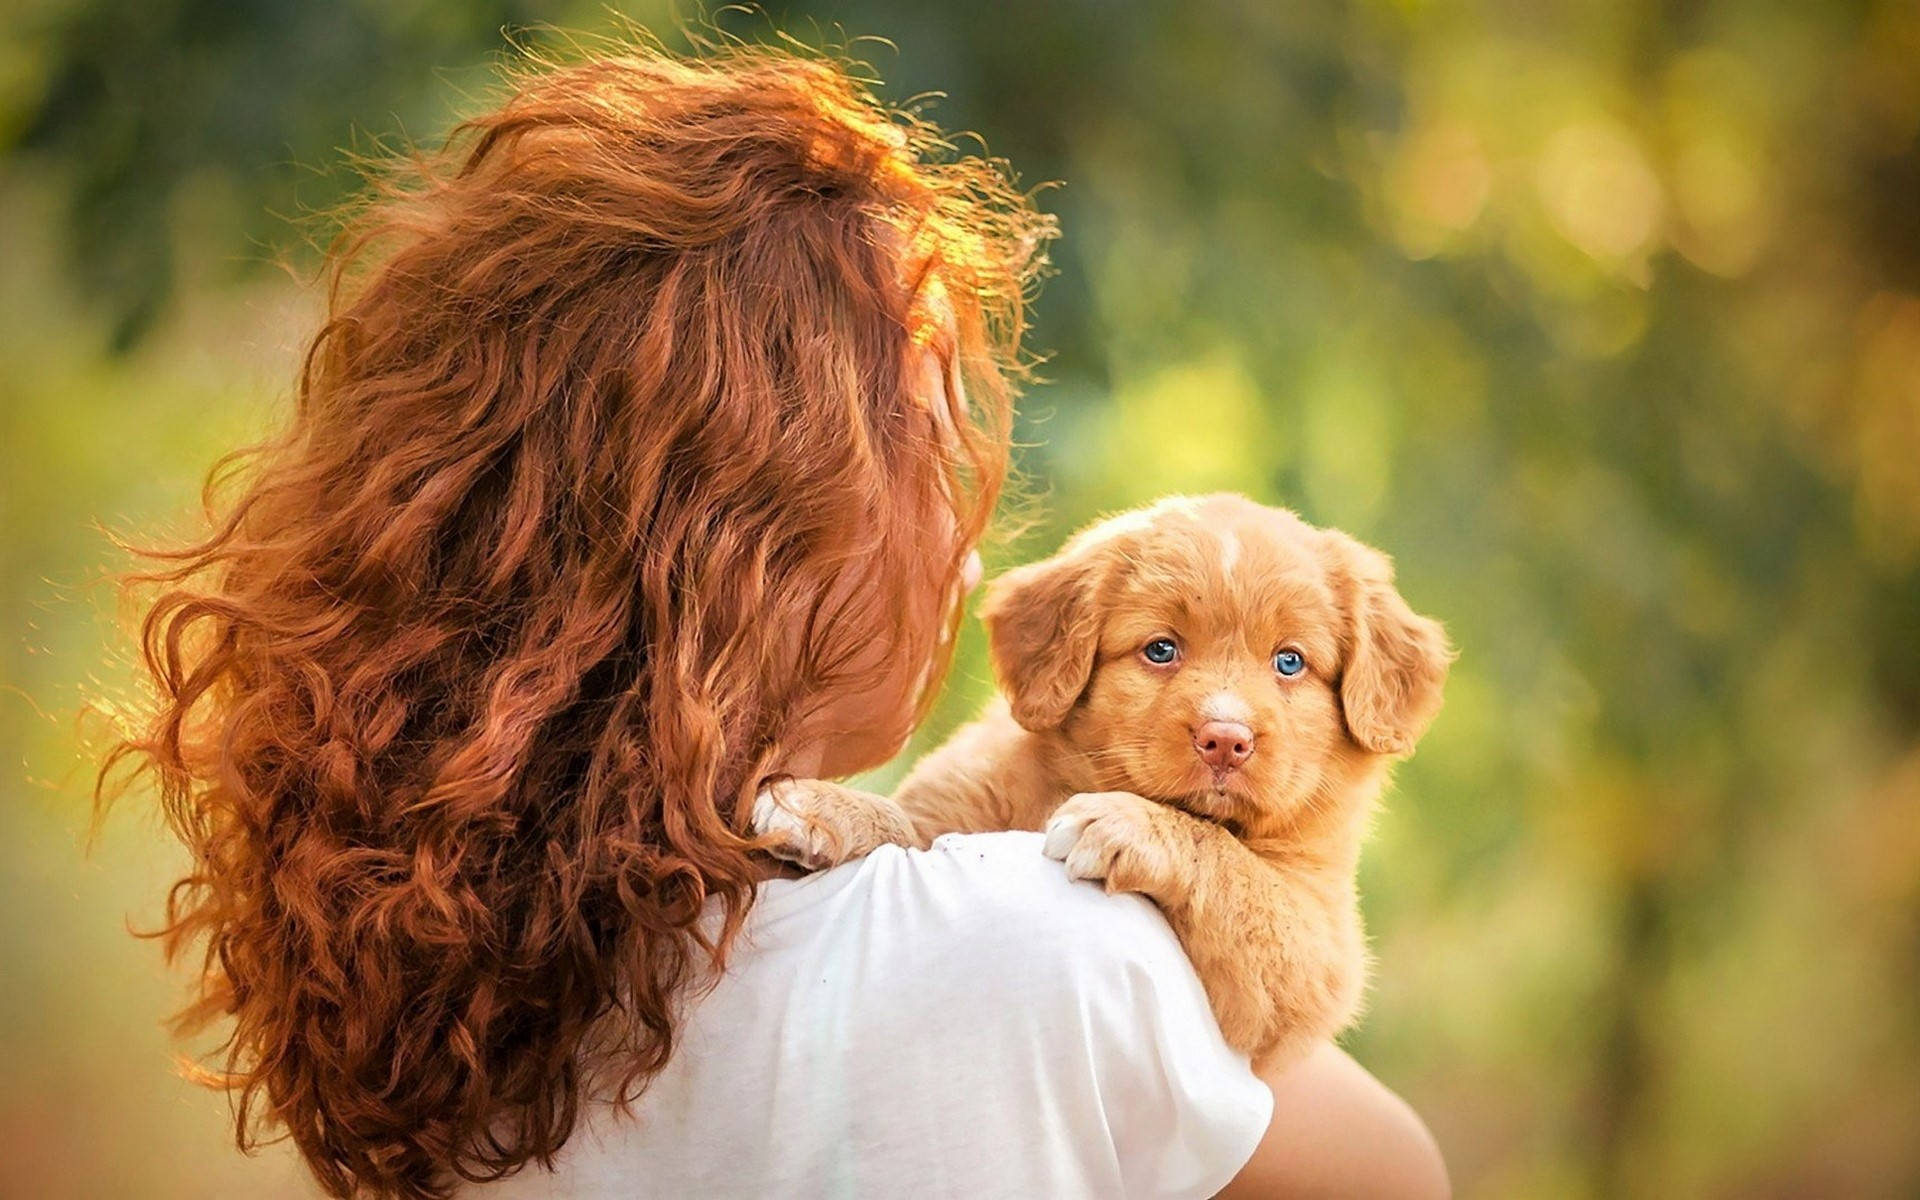 Small Golden Cute Puppy And Woman